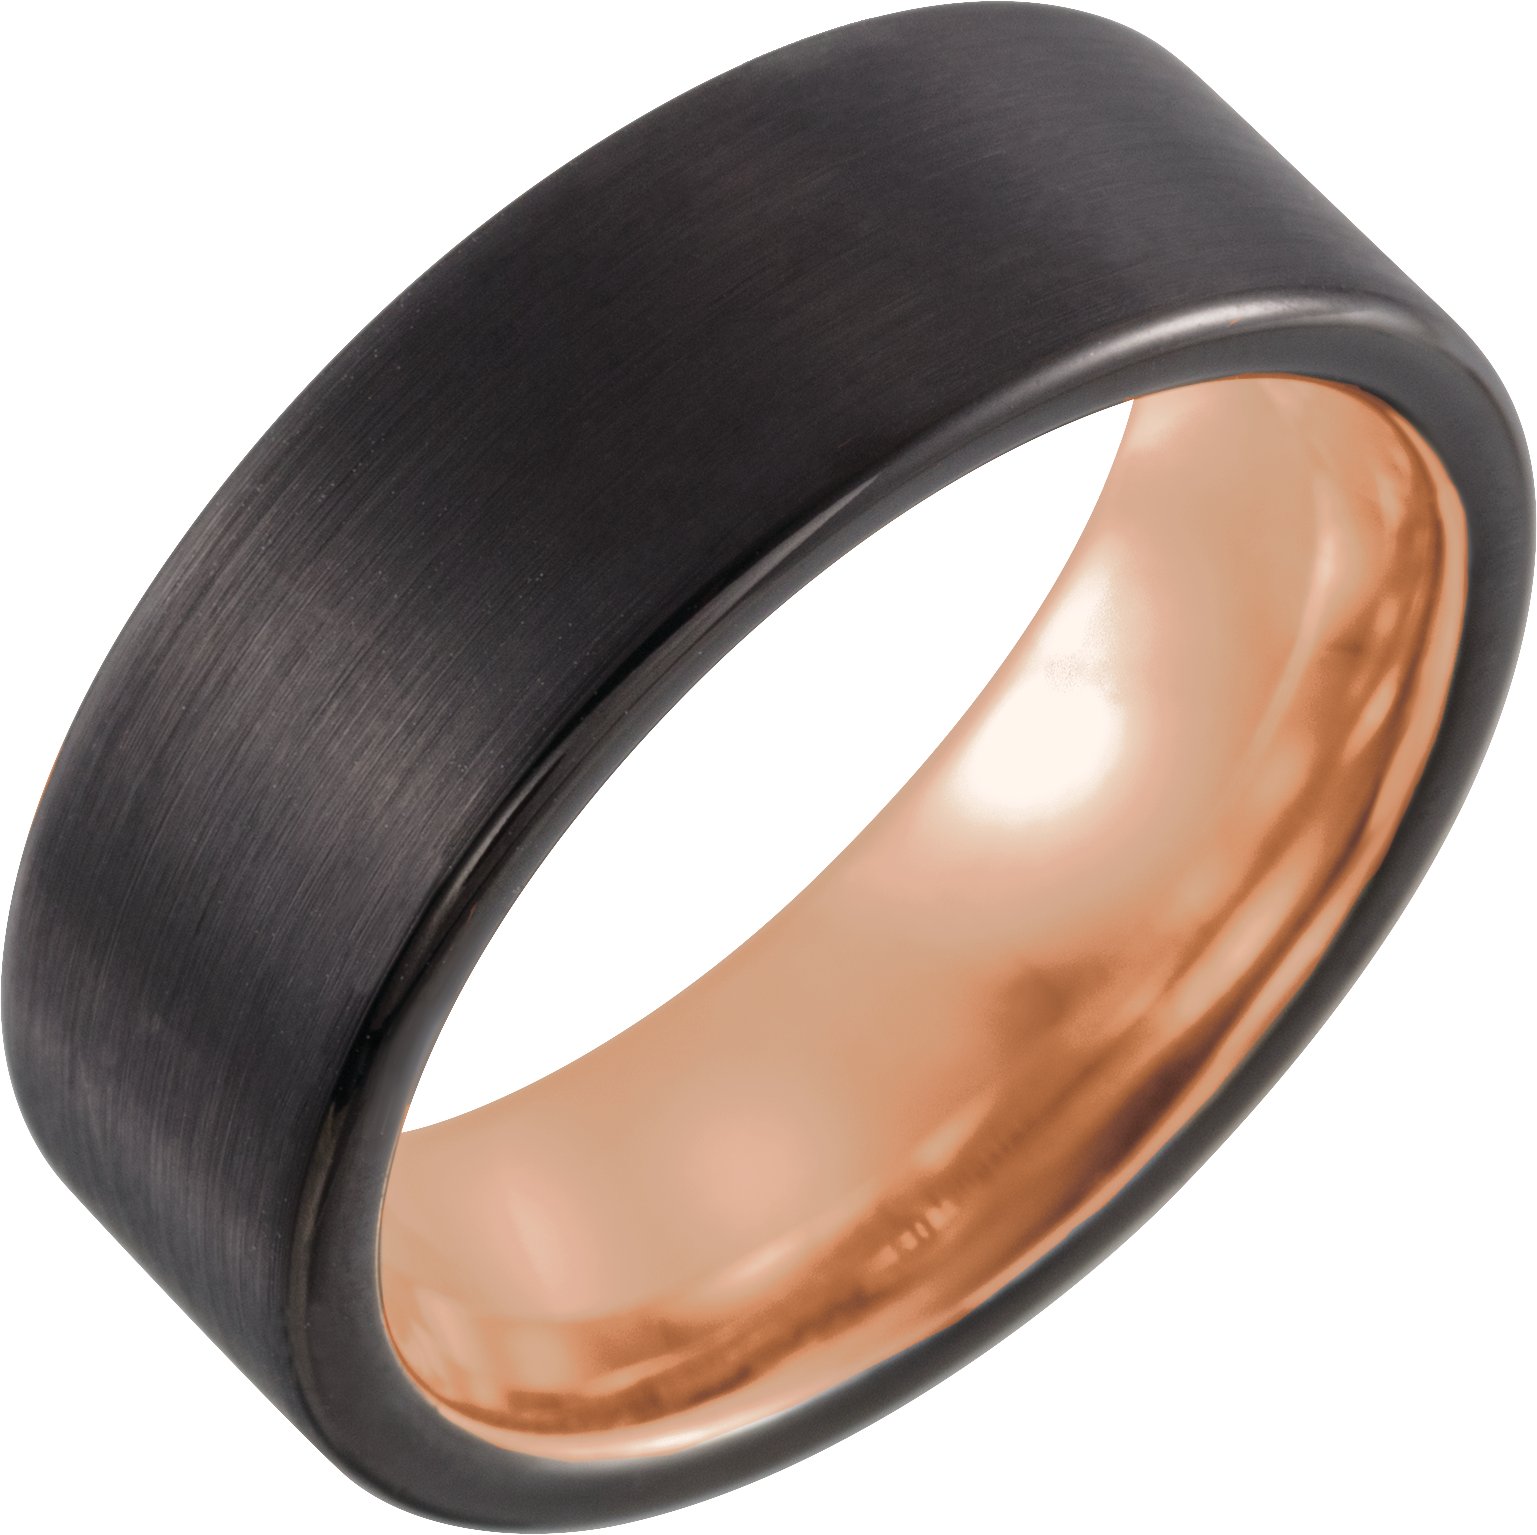 18K Rose Gold PVD and Black PVD Tungsten 8 mm Flat Edge Size 9.5 Band with Satin Finish